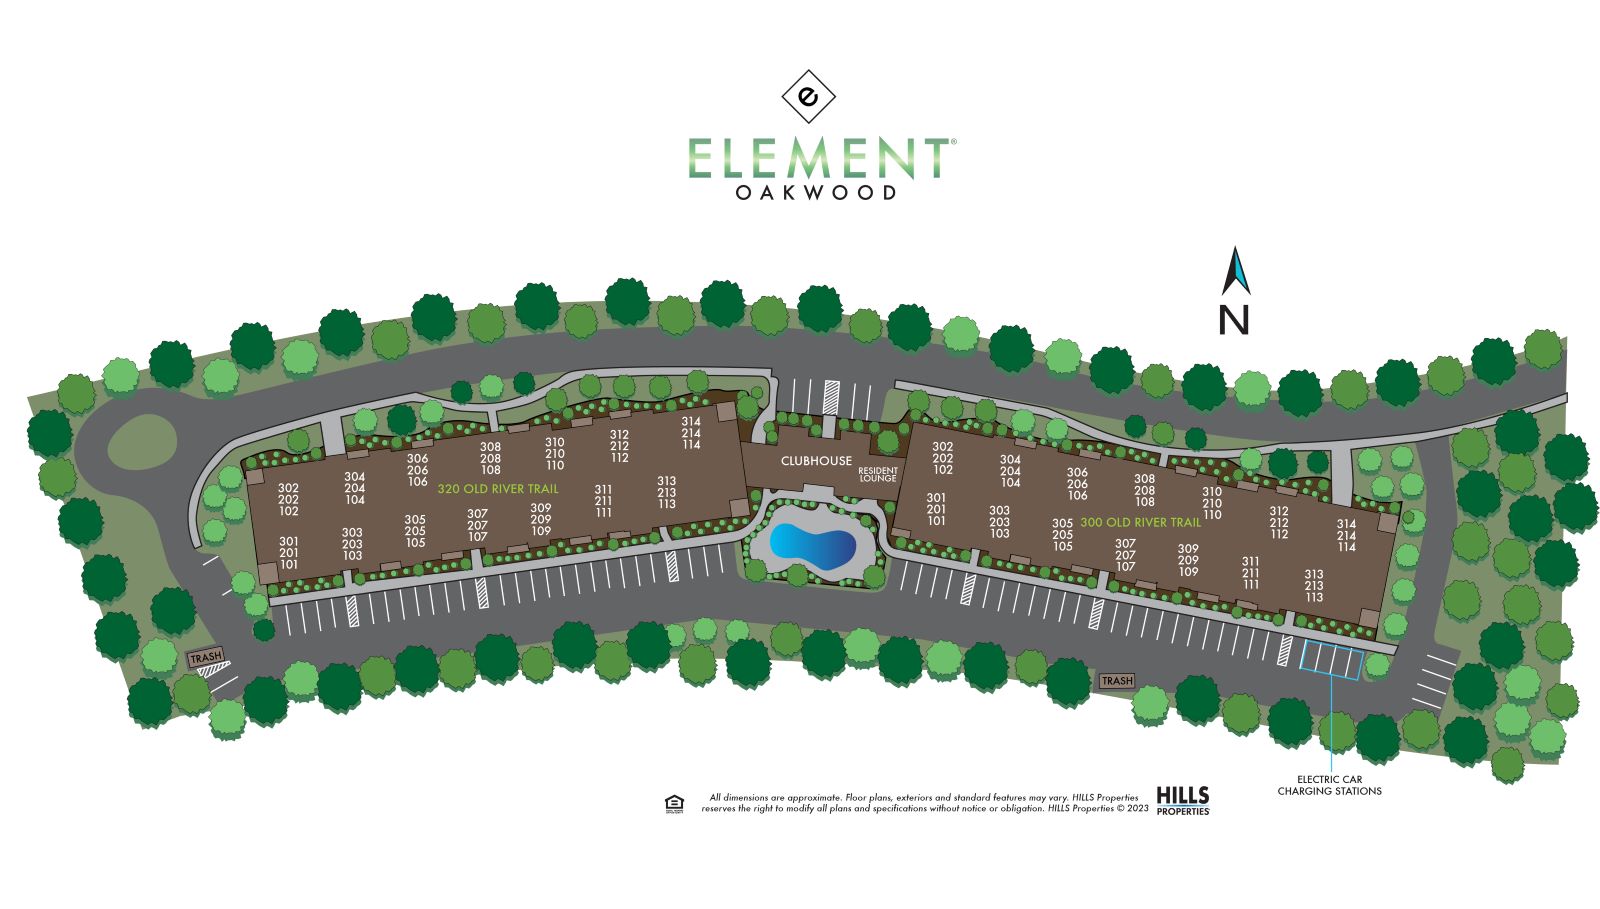 An illustrated map of the Element Oakwood community.